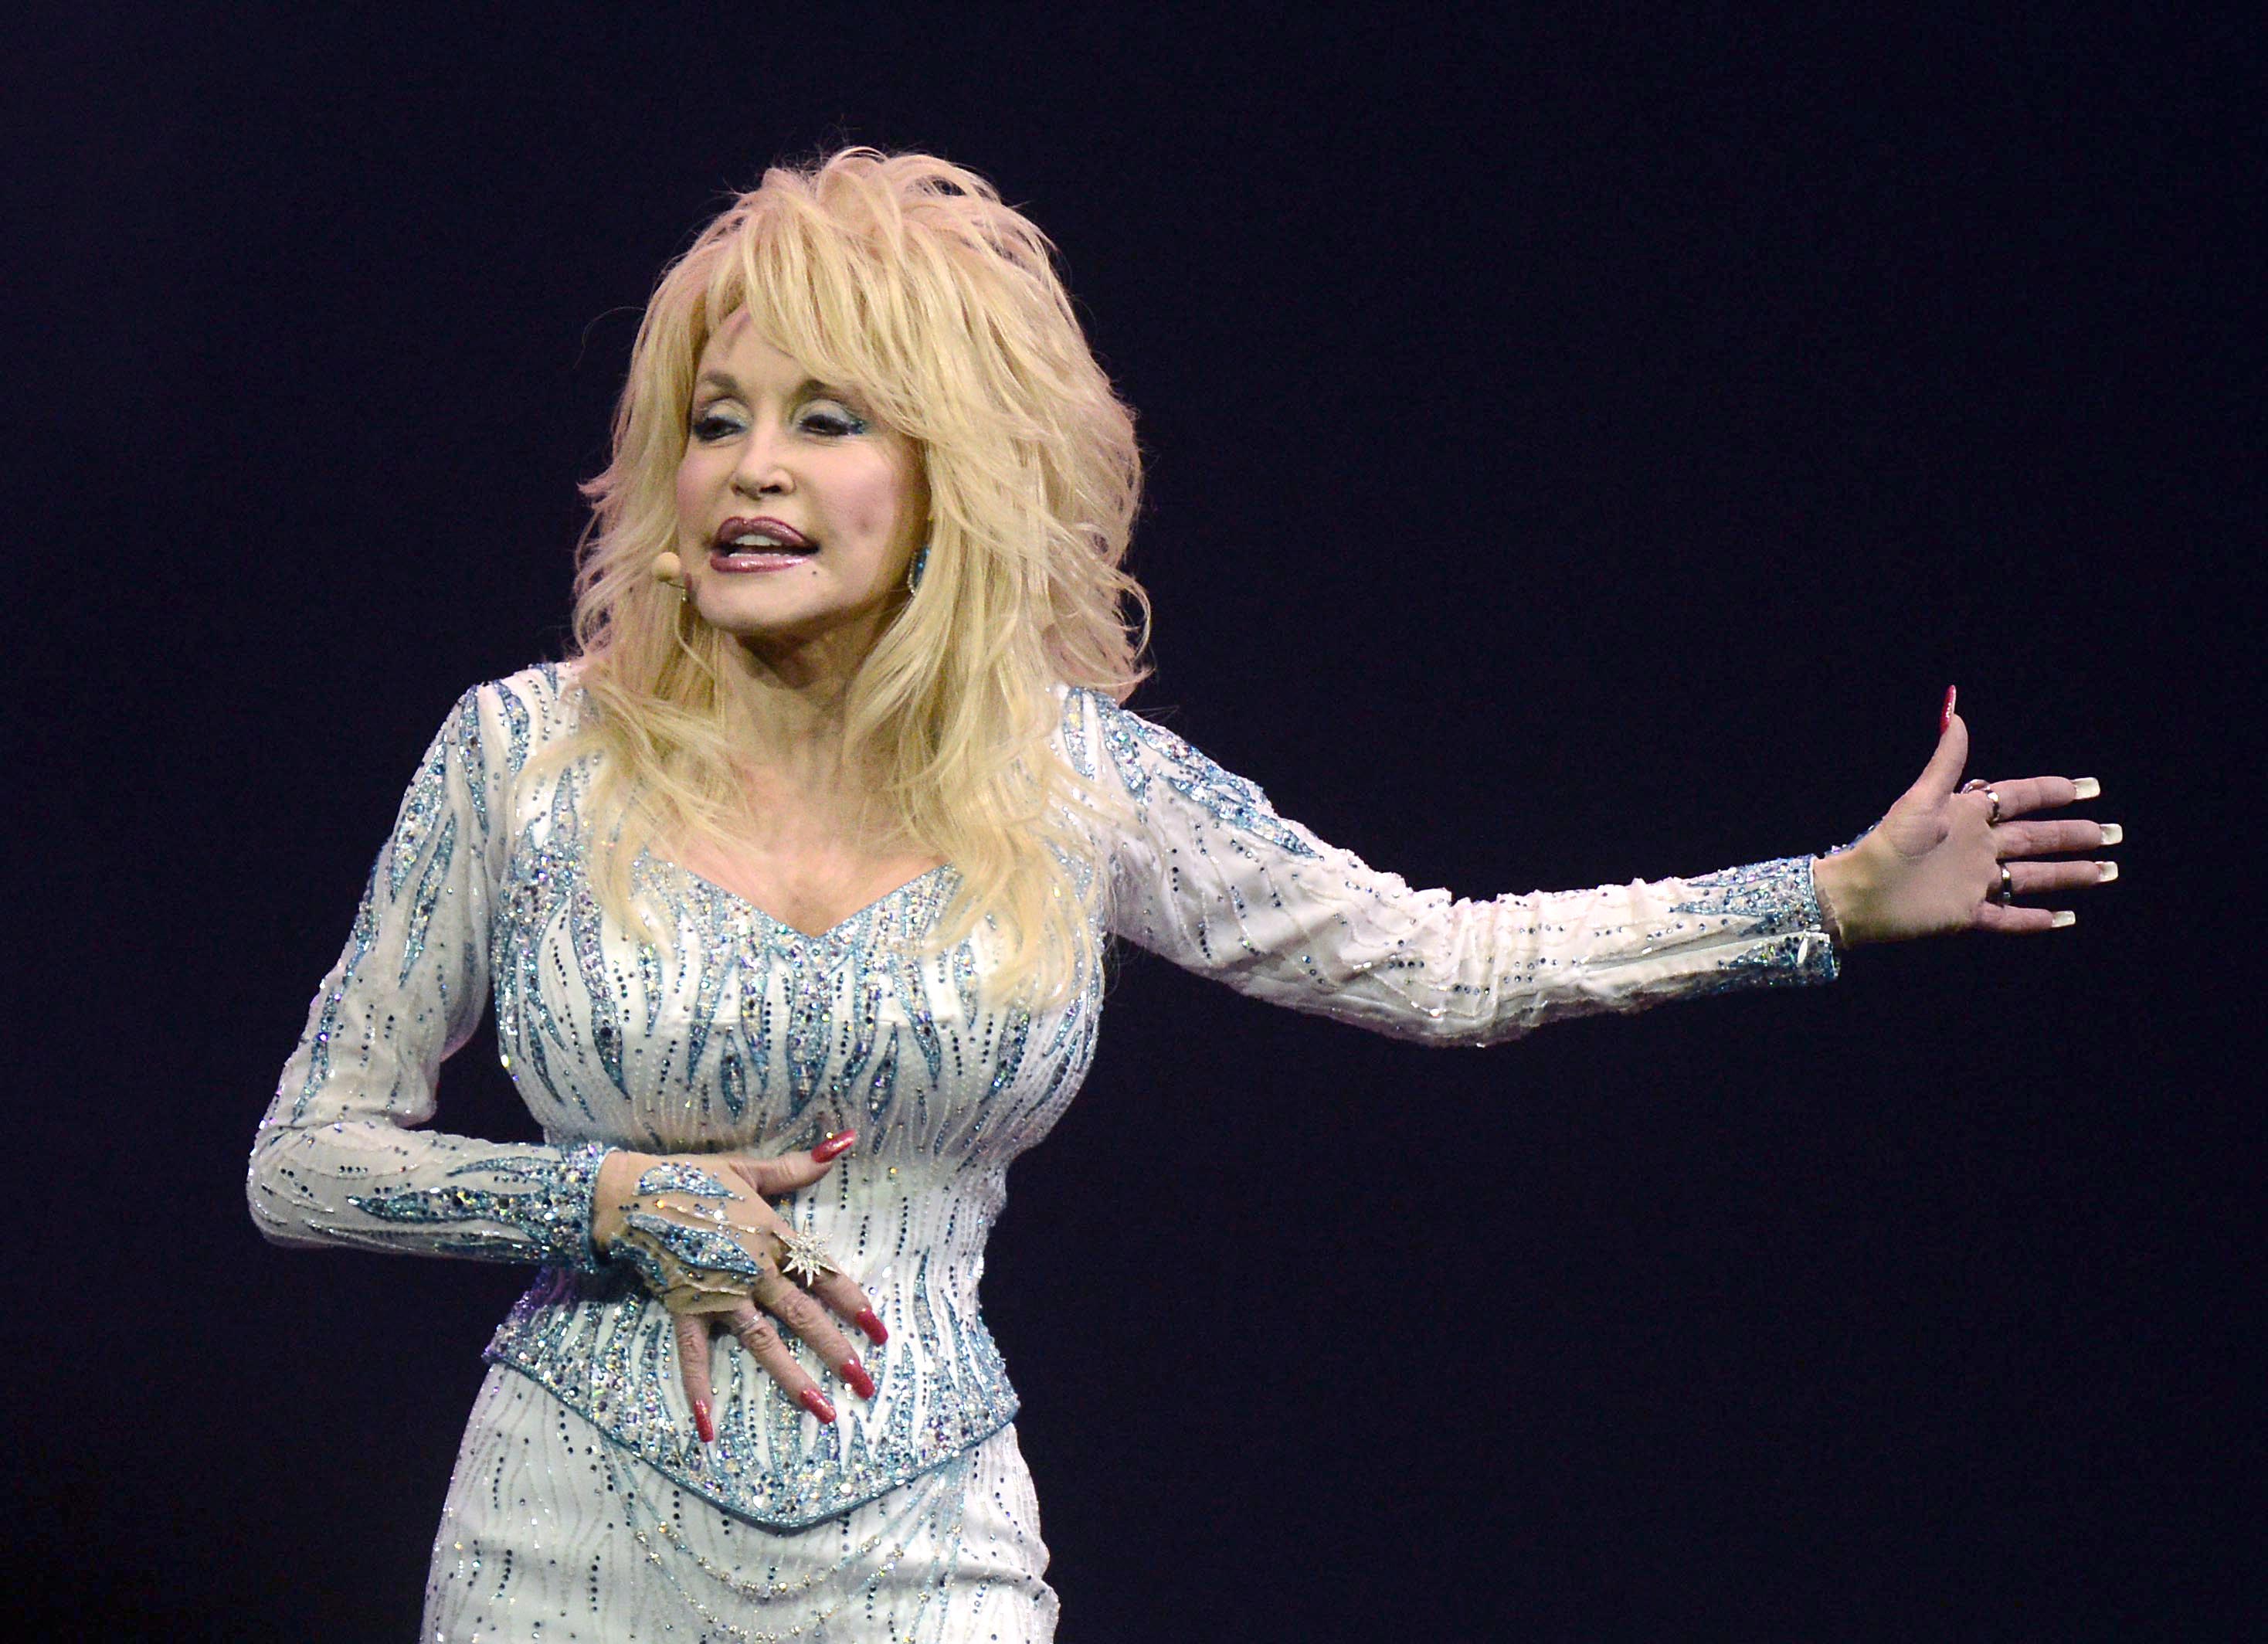 Dolly Parton performs at the Lanxess Arena concert venue in Cologne, Germany in 2014.